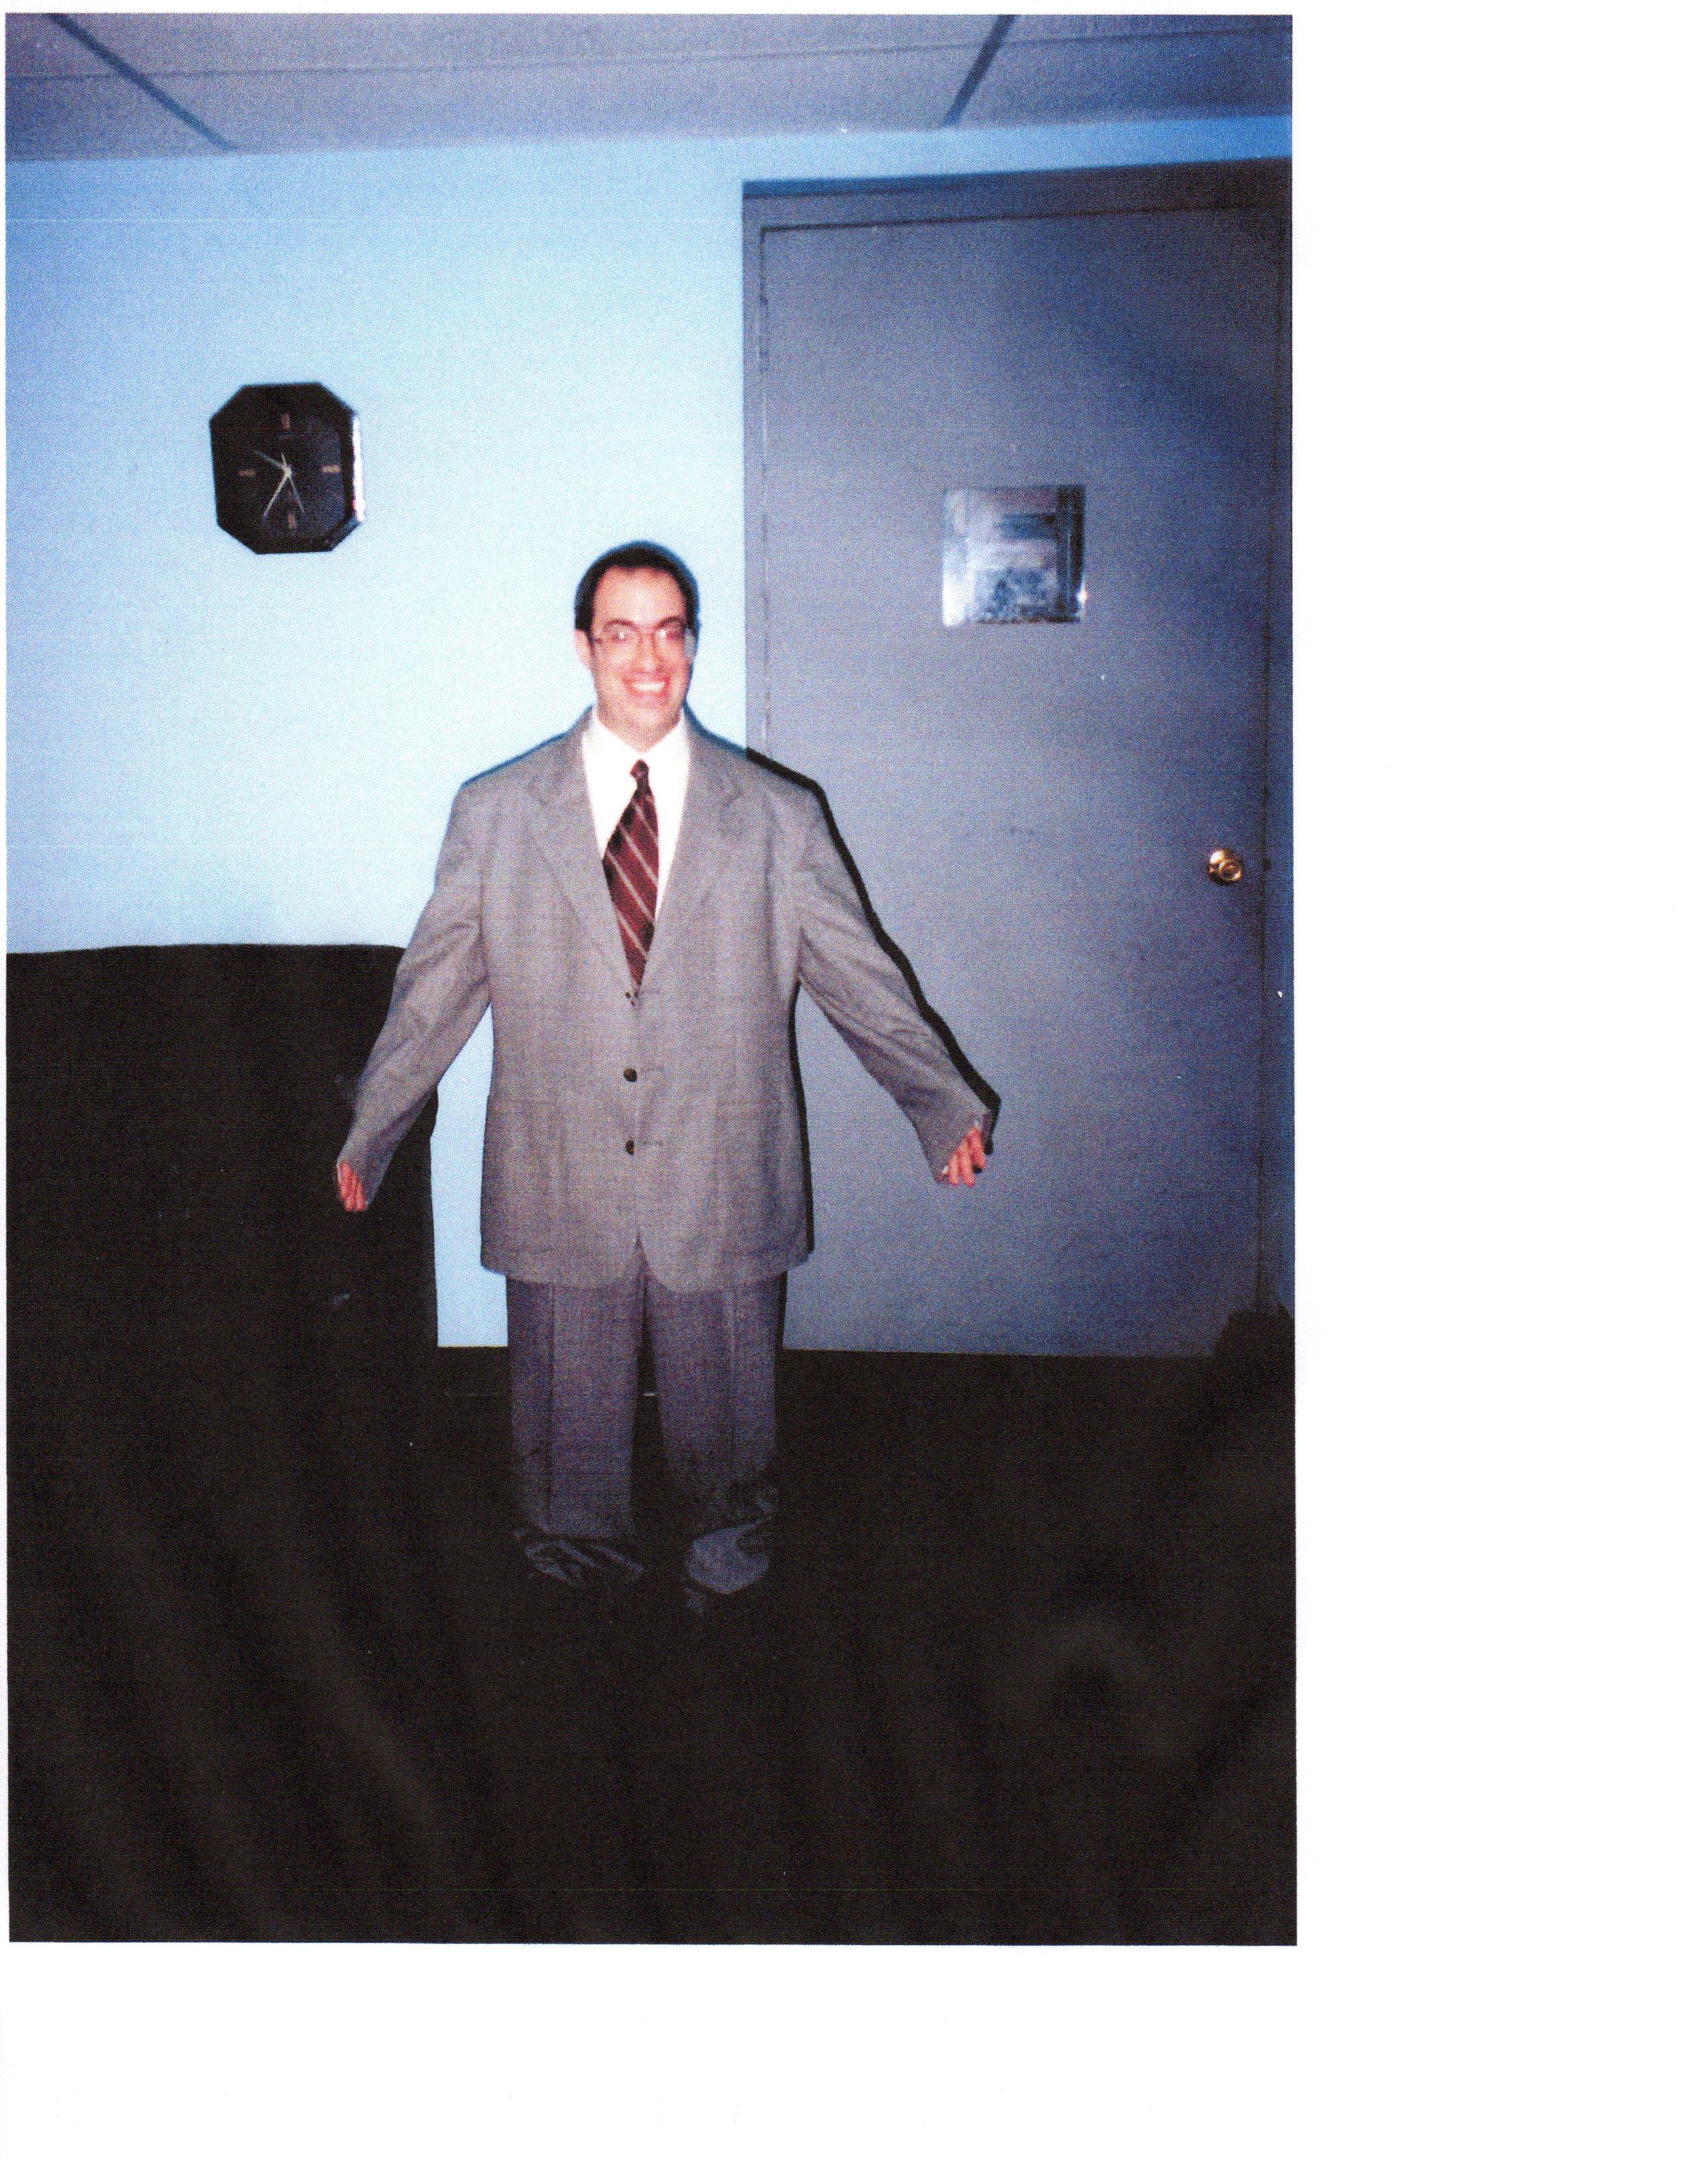 Jeff Eigen as a short guy in a big suit on the set of an AT&T commercial